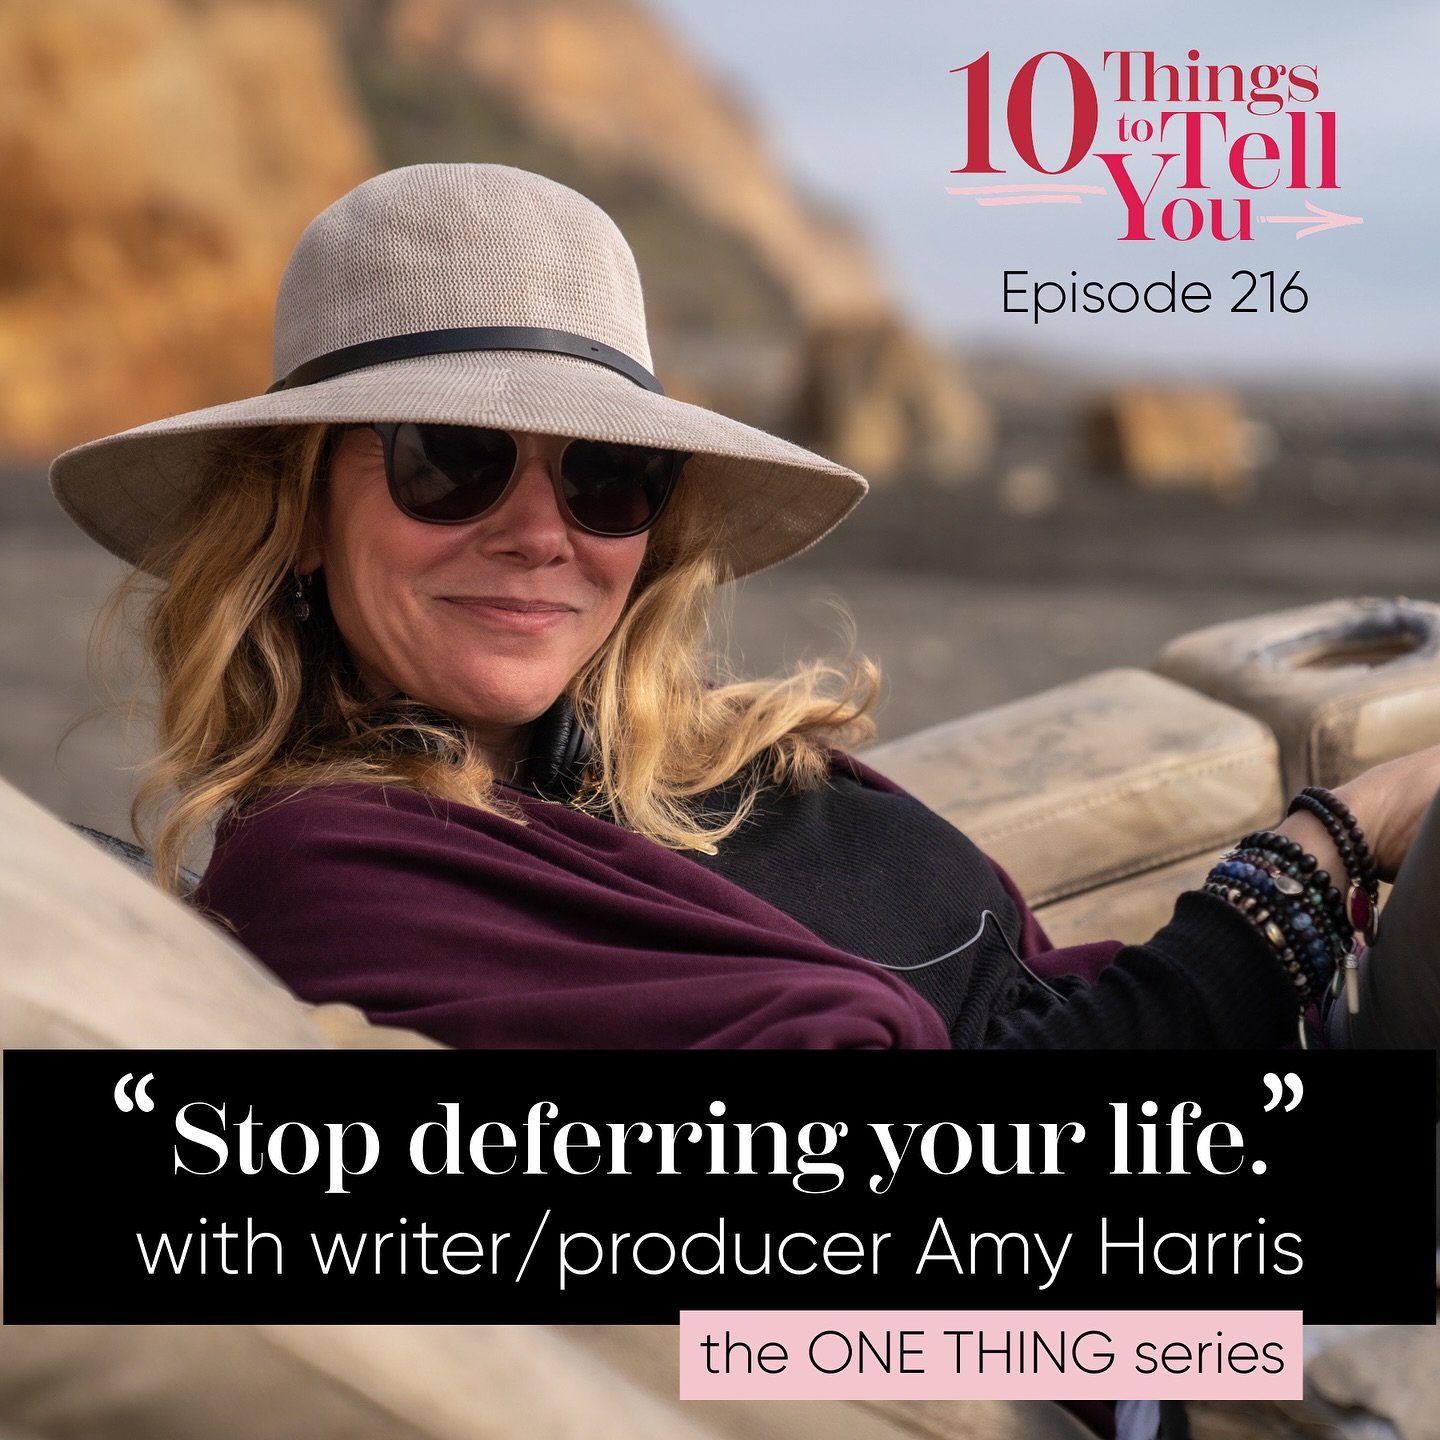 NEW EPISODE! 🎉 I&rsquo;m kicking off my new ONE THING series with my friend, writer/producer/showrunner @abharris. 

Amy Harris has worked on some of the most iconic shows of our lifetime, including Sex and the City, Gossip Girl, The Comeback, and m